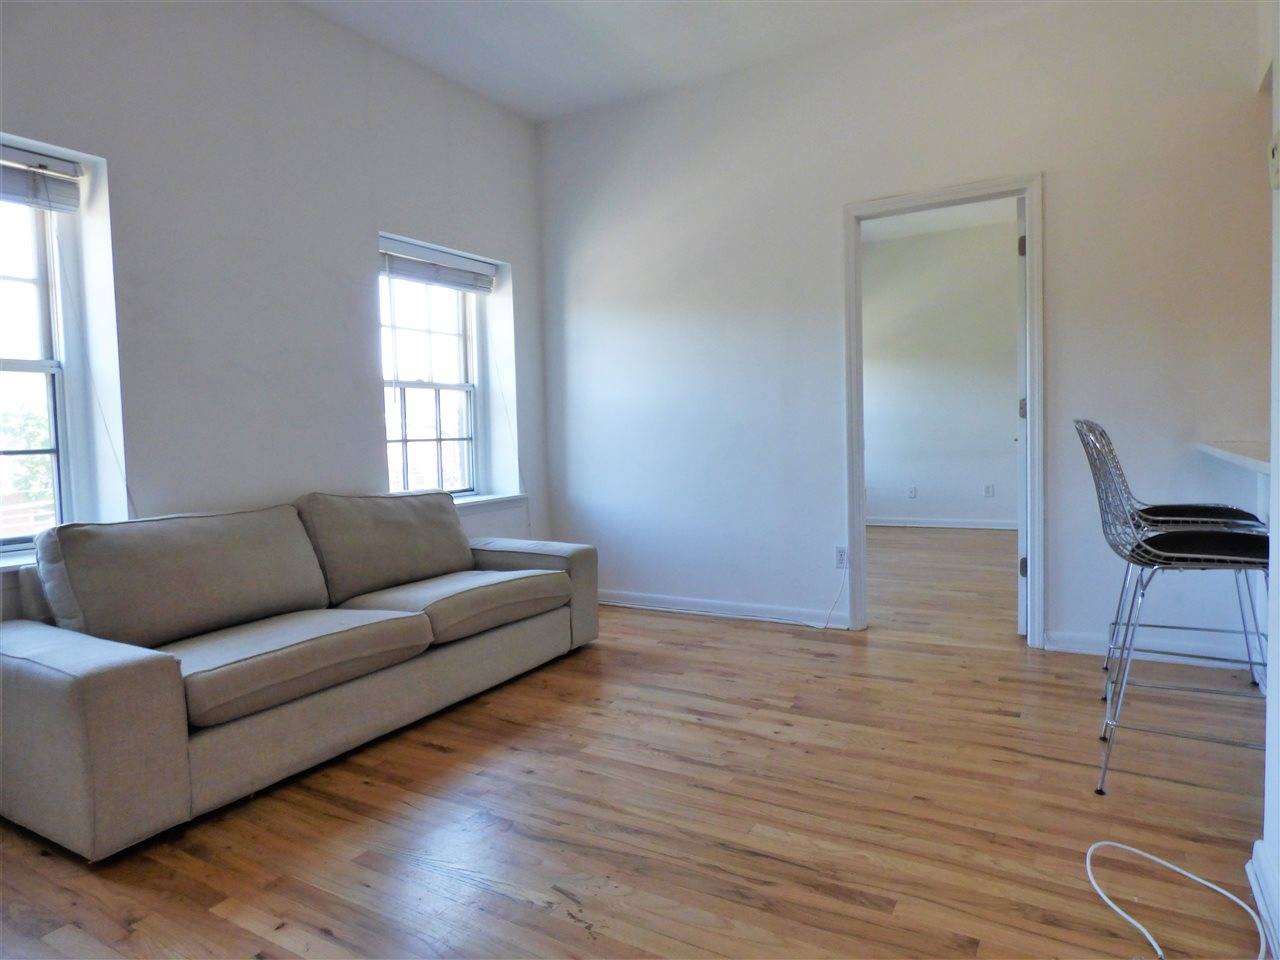 Exceptional 1 bedroom/1 bath unit in the heart of Downtown Jersey City